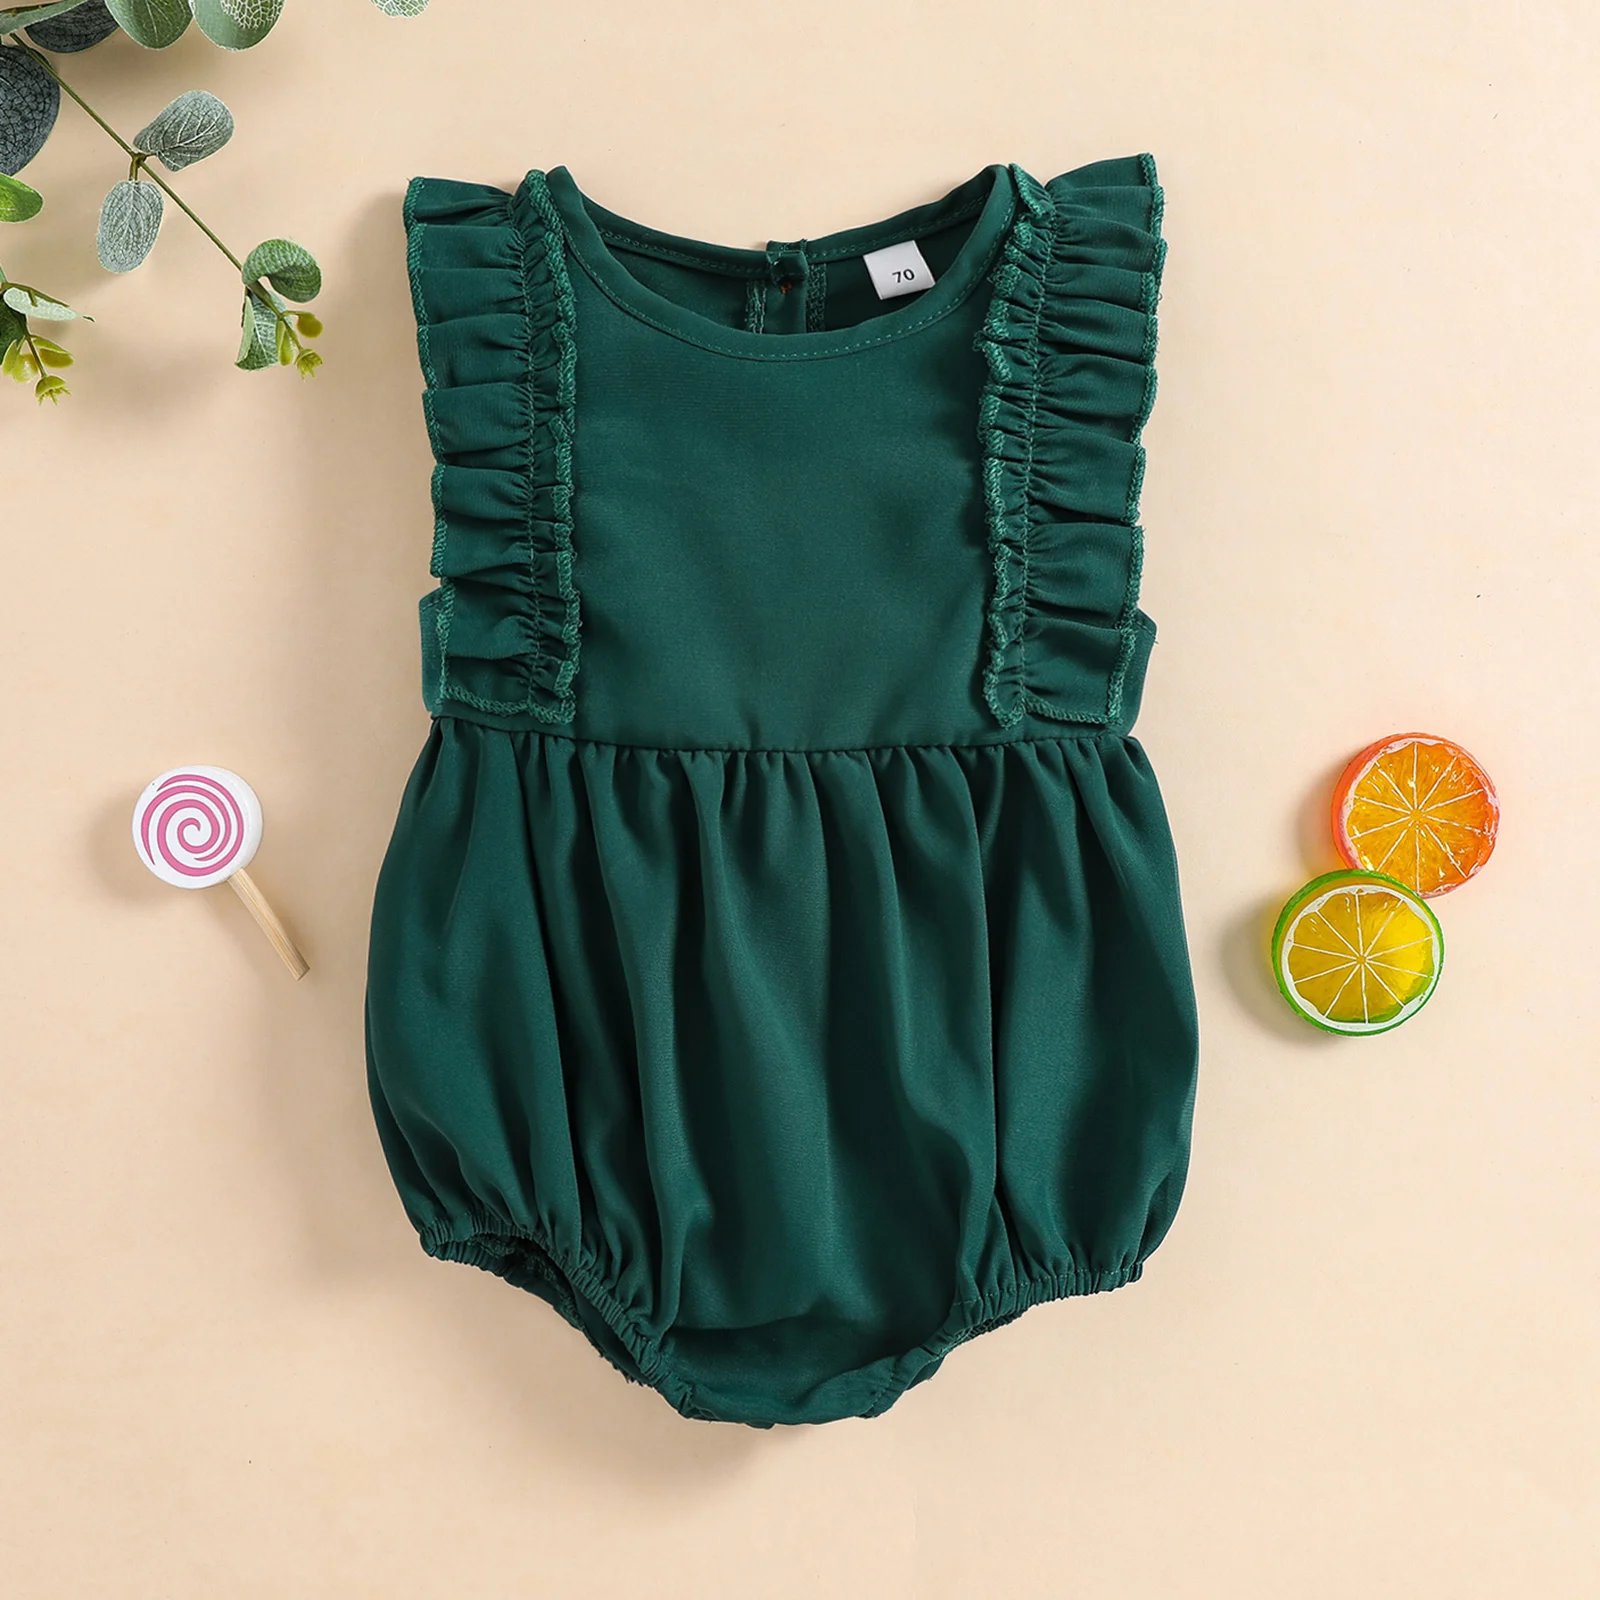 bamboo baby bodysuits	 Ma&Baby 0-24M Newborn Infant Baby Girls Romper Ruffle Button Jumpsuit Playsuit Summer Girl Clothing Costumes D01 bright baby bodysuits	